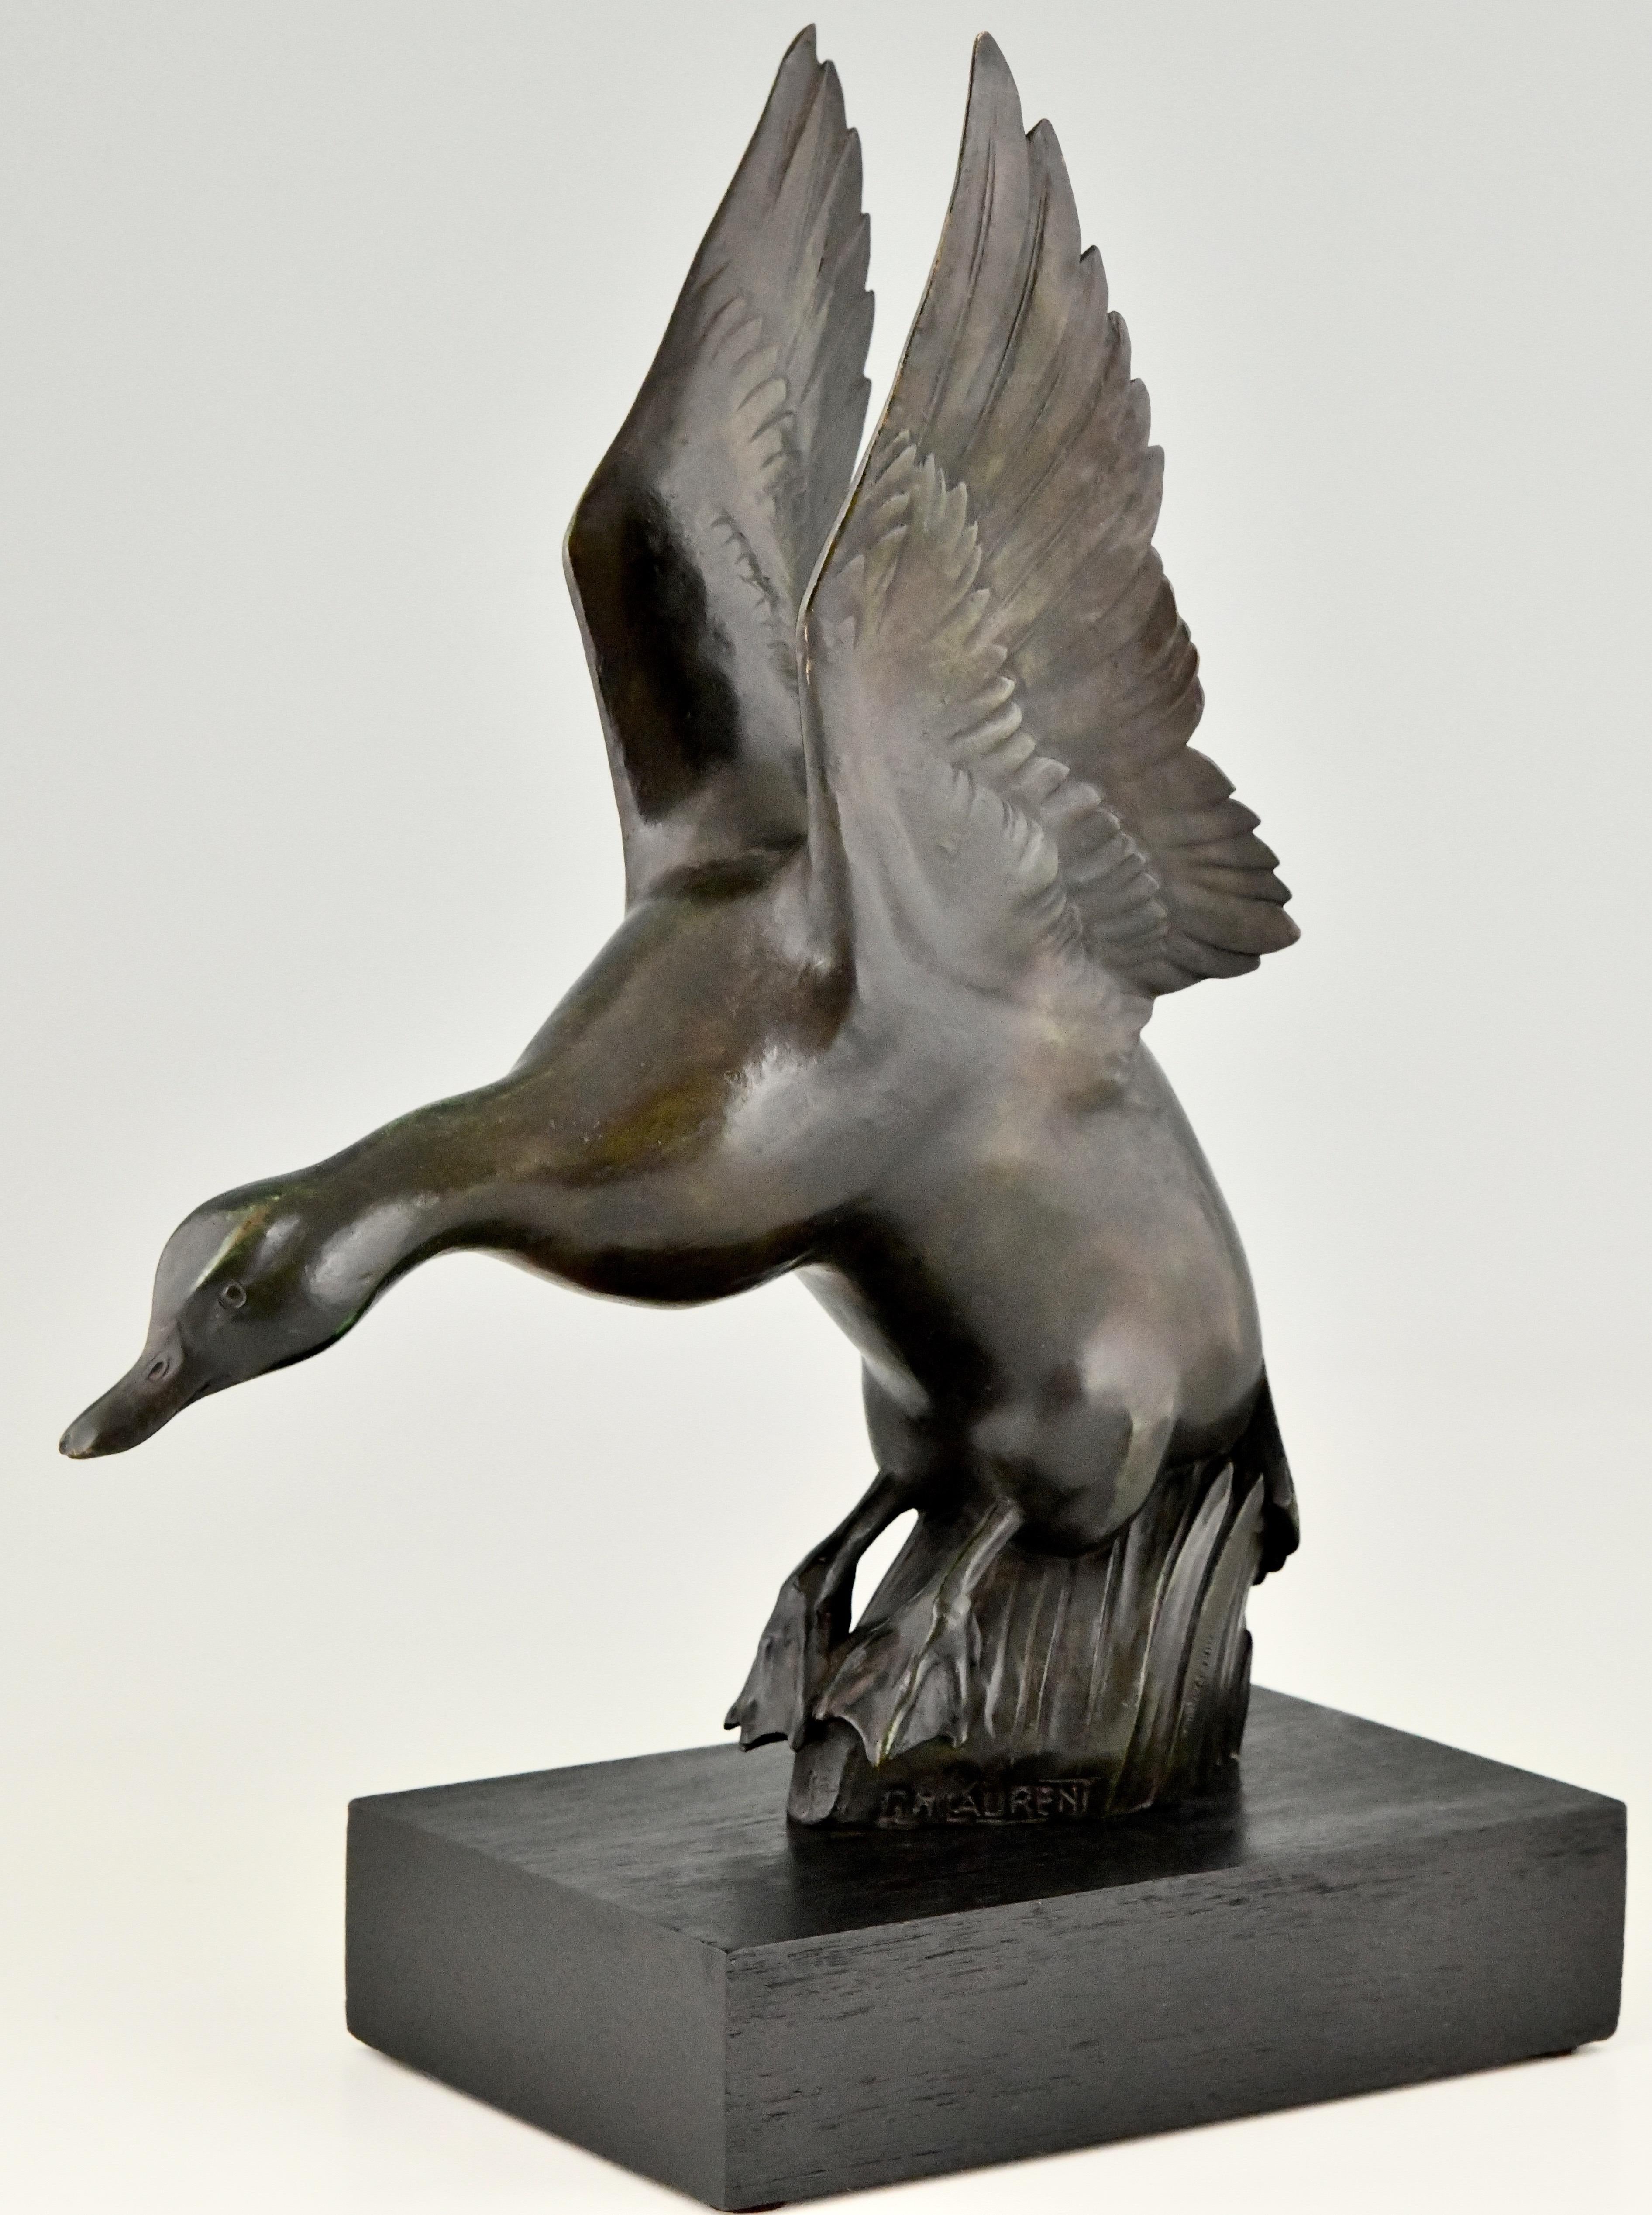 Art Deco bronze sculpture of a duck by the artist Georges H. Laurent. Marked Cire perdue and Bronze. France ca. 1925/1930. Beautiful patina. On wooden base. 
Literature:
